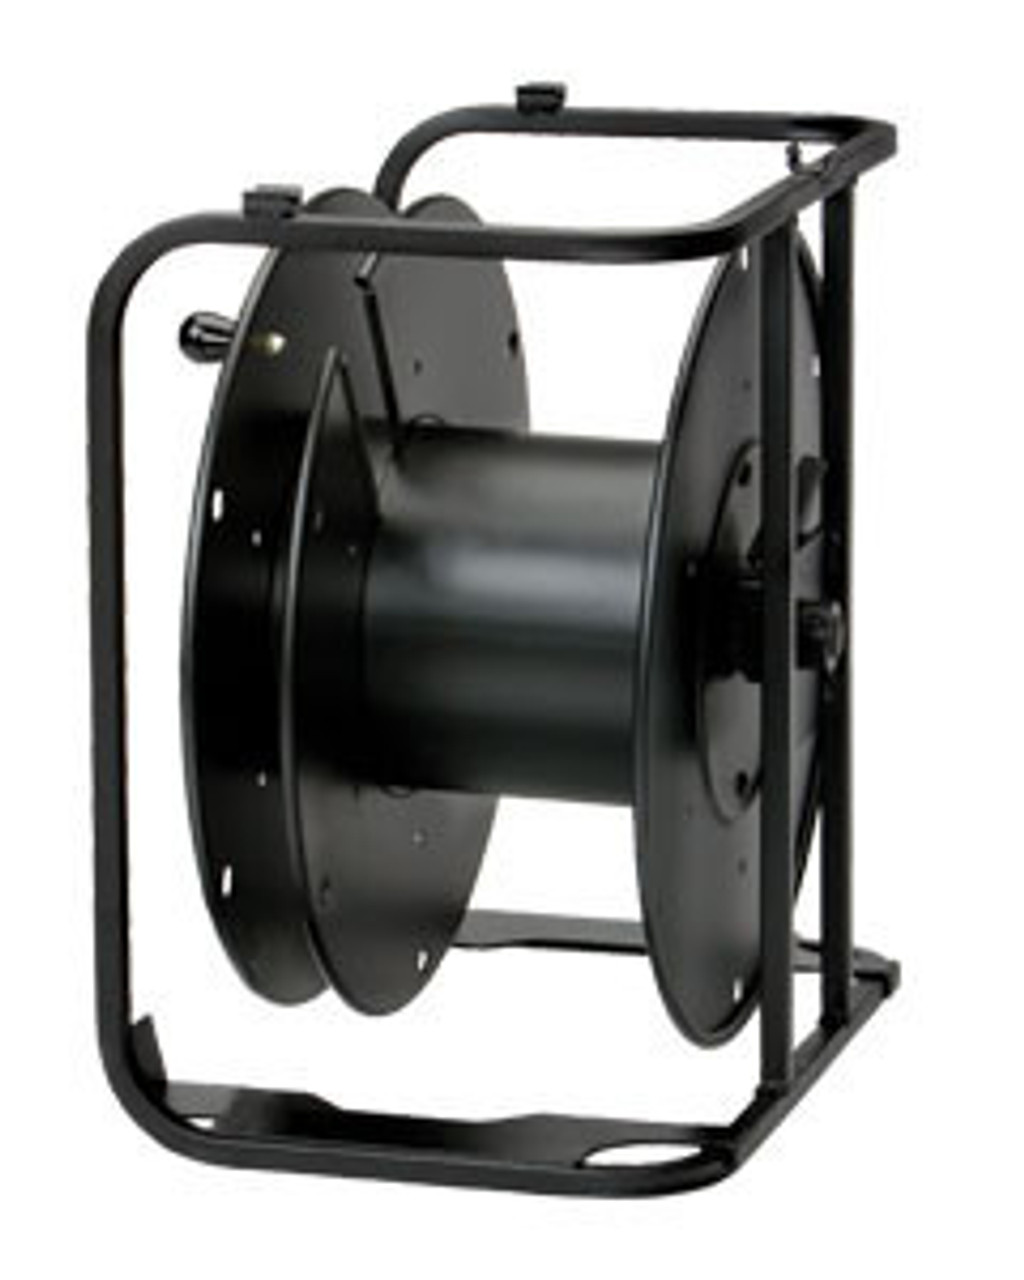 13-06 AVD-2 Portable Cable Storage Reel w/ Slotted Divider Disc